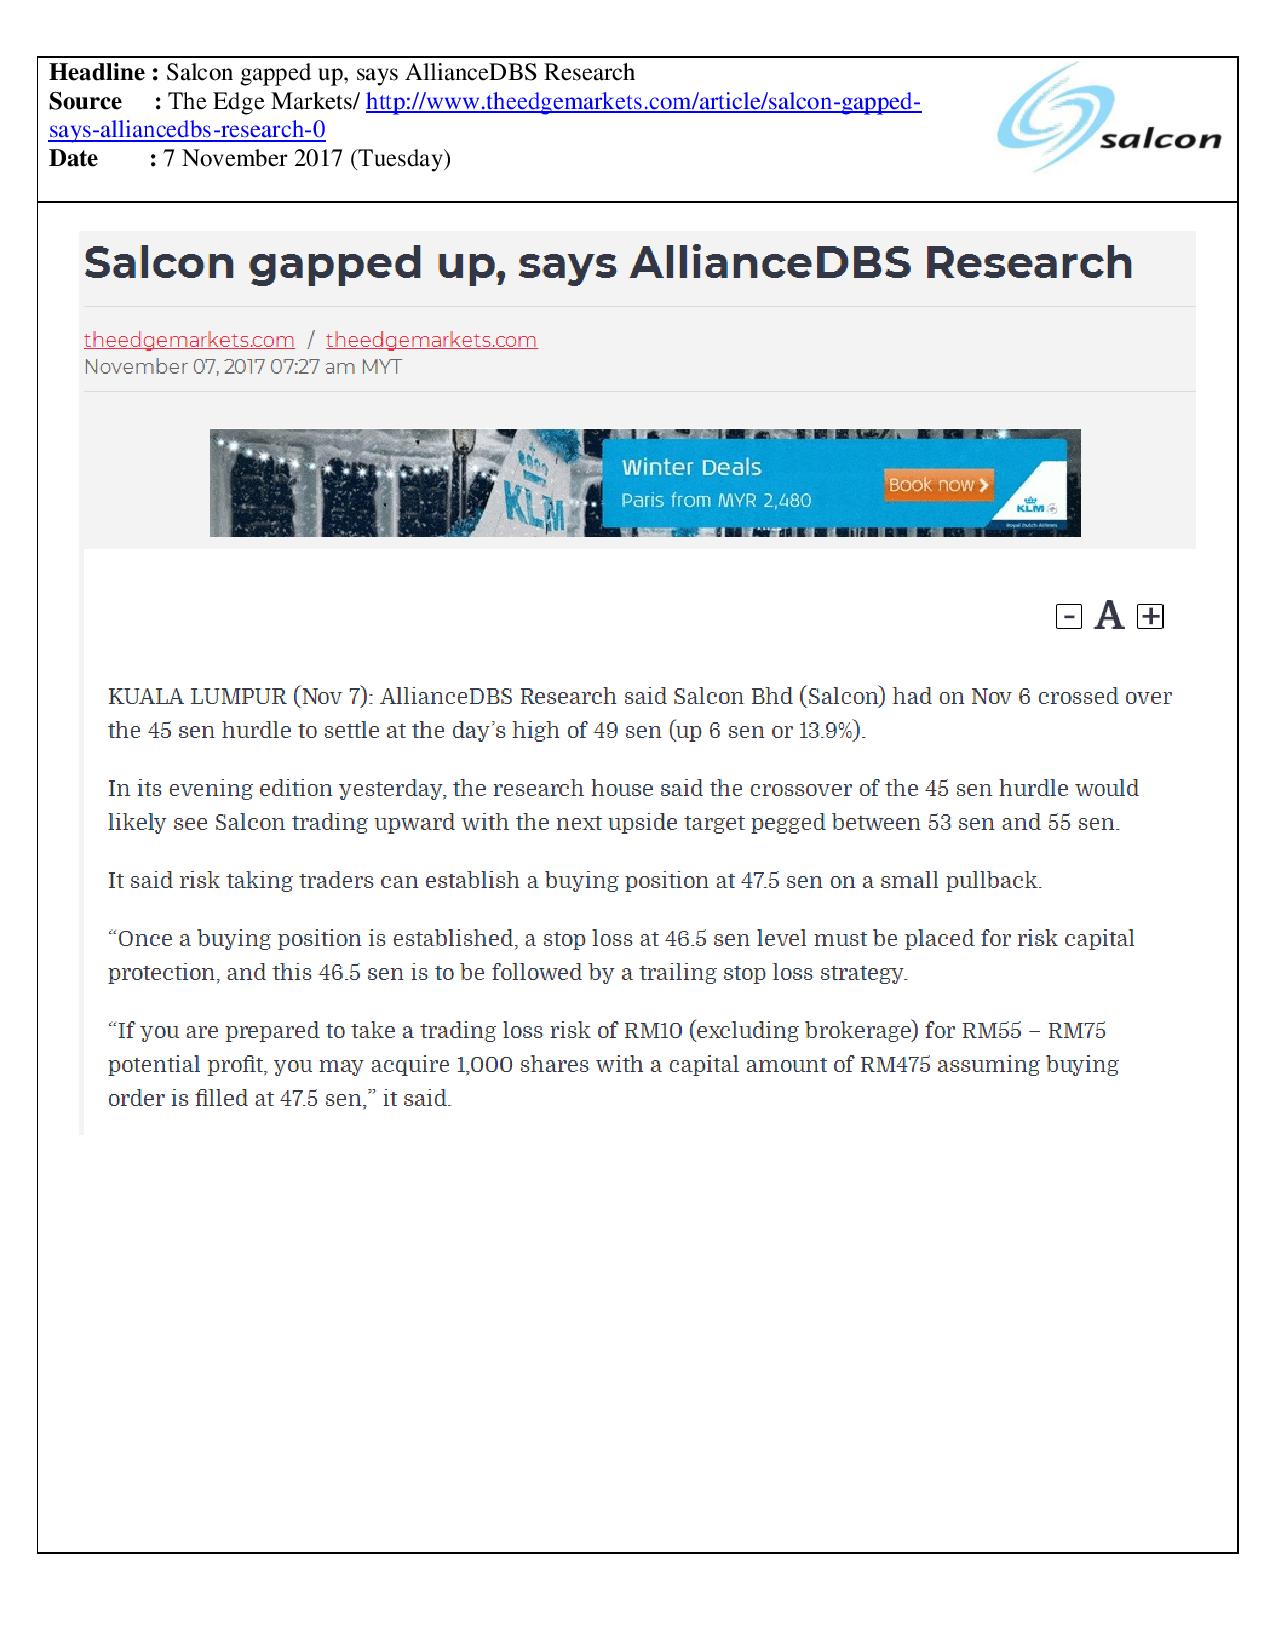 Salcon gapped up, says AllianceDBS Research